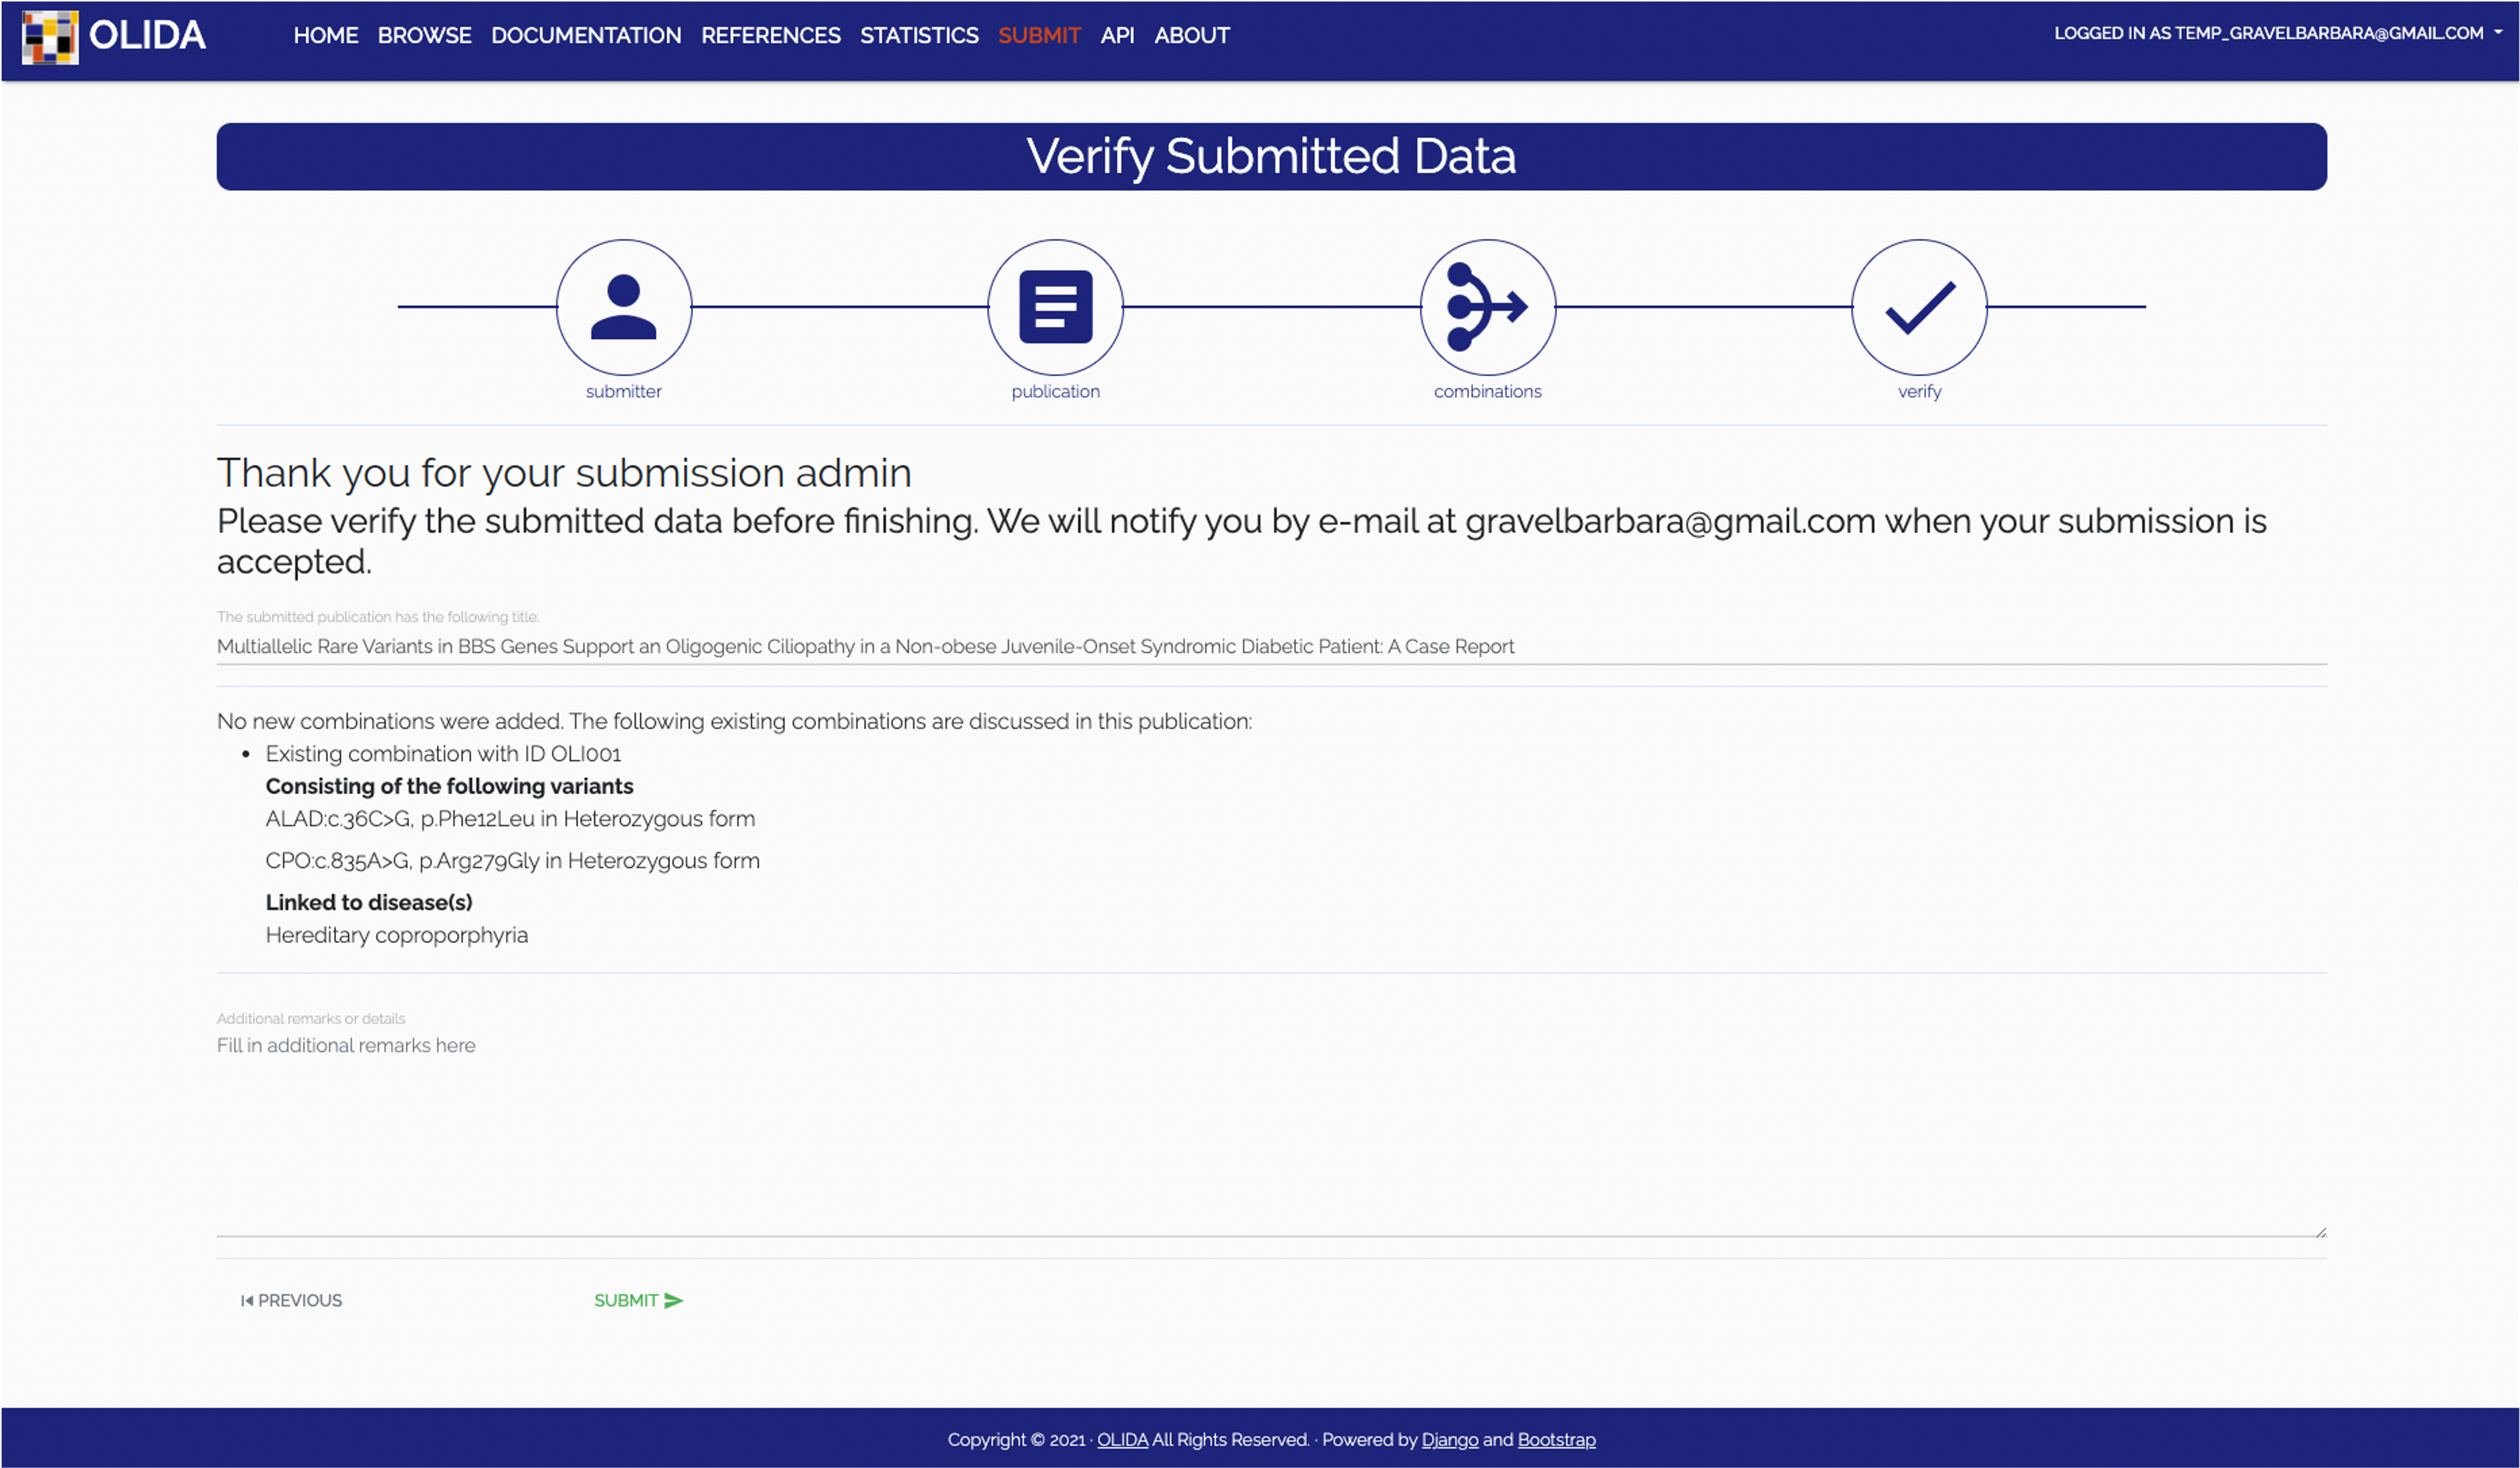 Verify Submitted Data